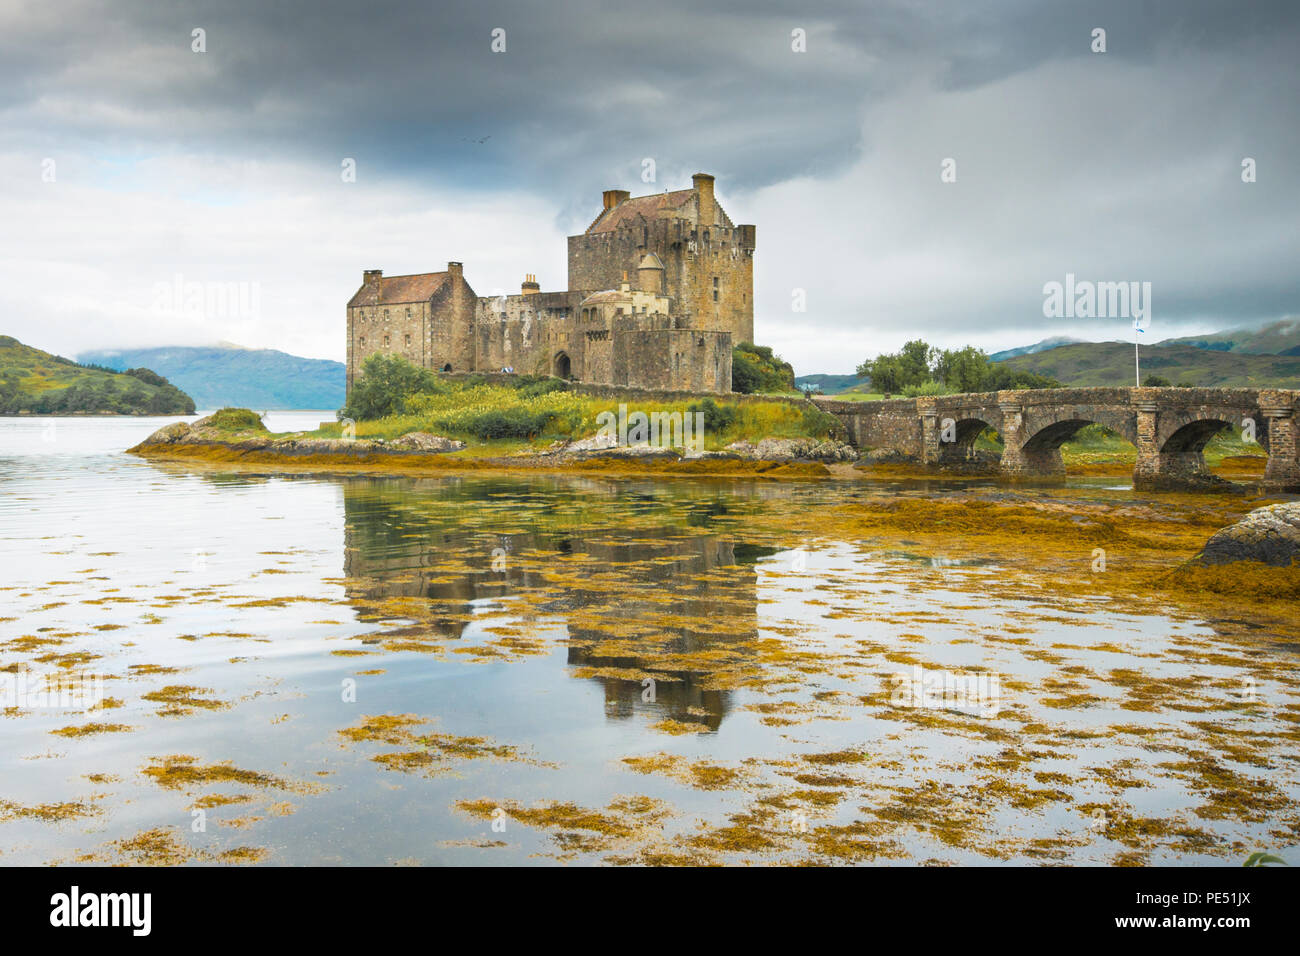 Eileen Donan Castle on the shores of Loch Duich, Loch Long and Loch Alsh. Stock Photo